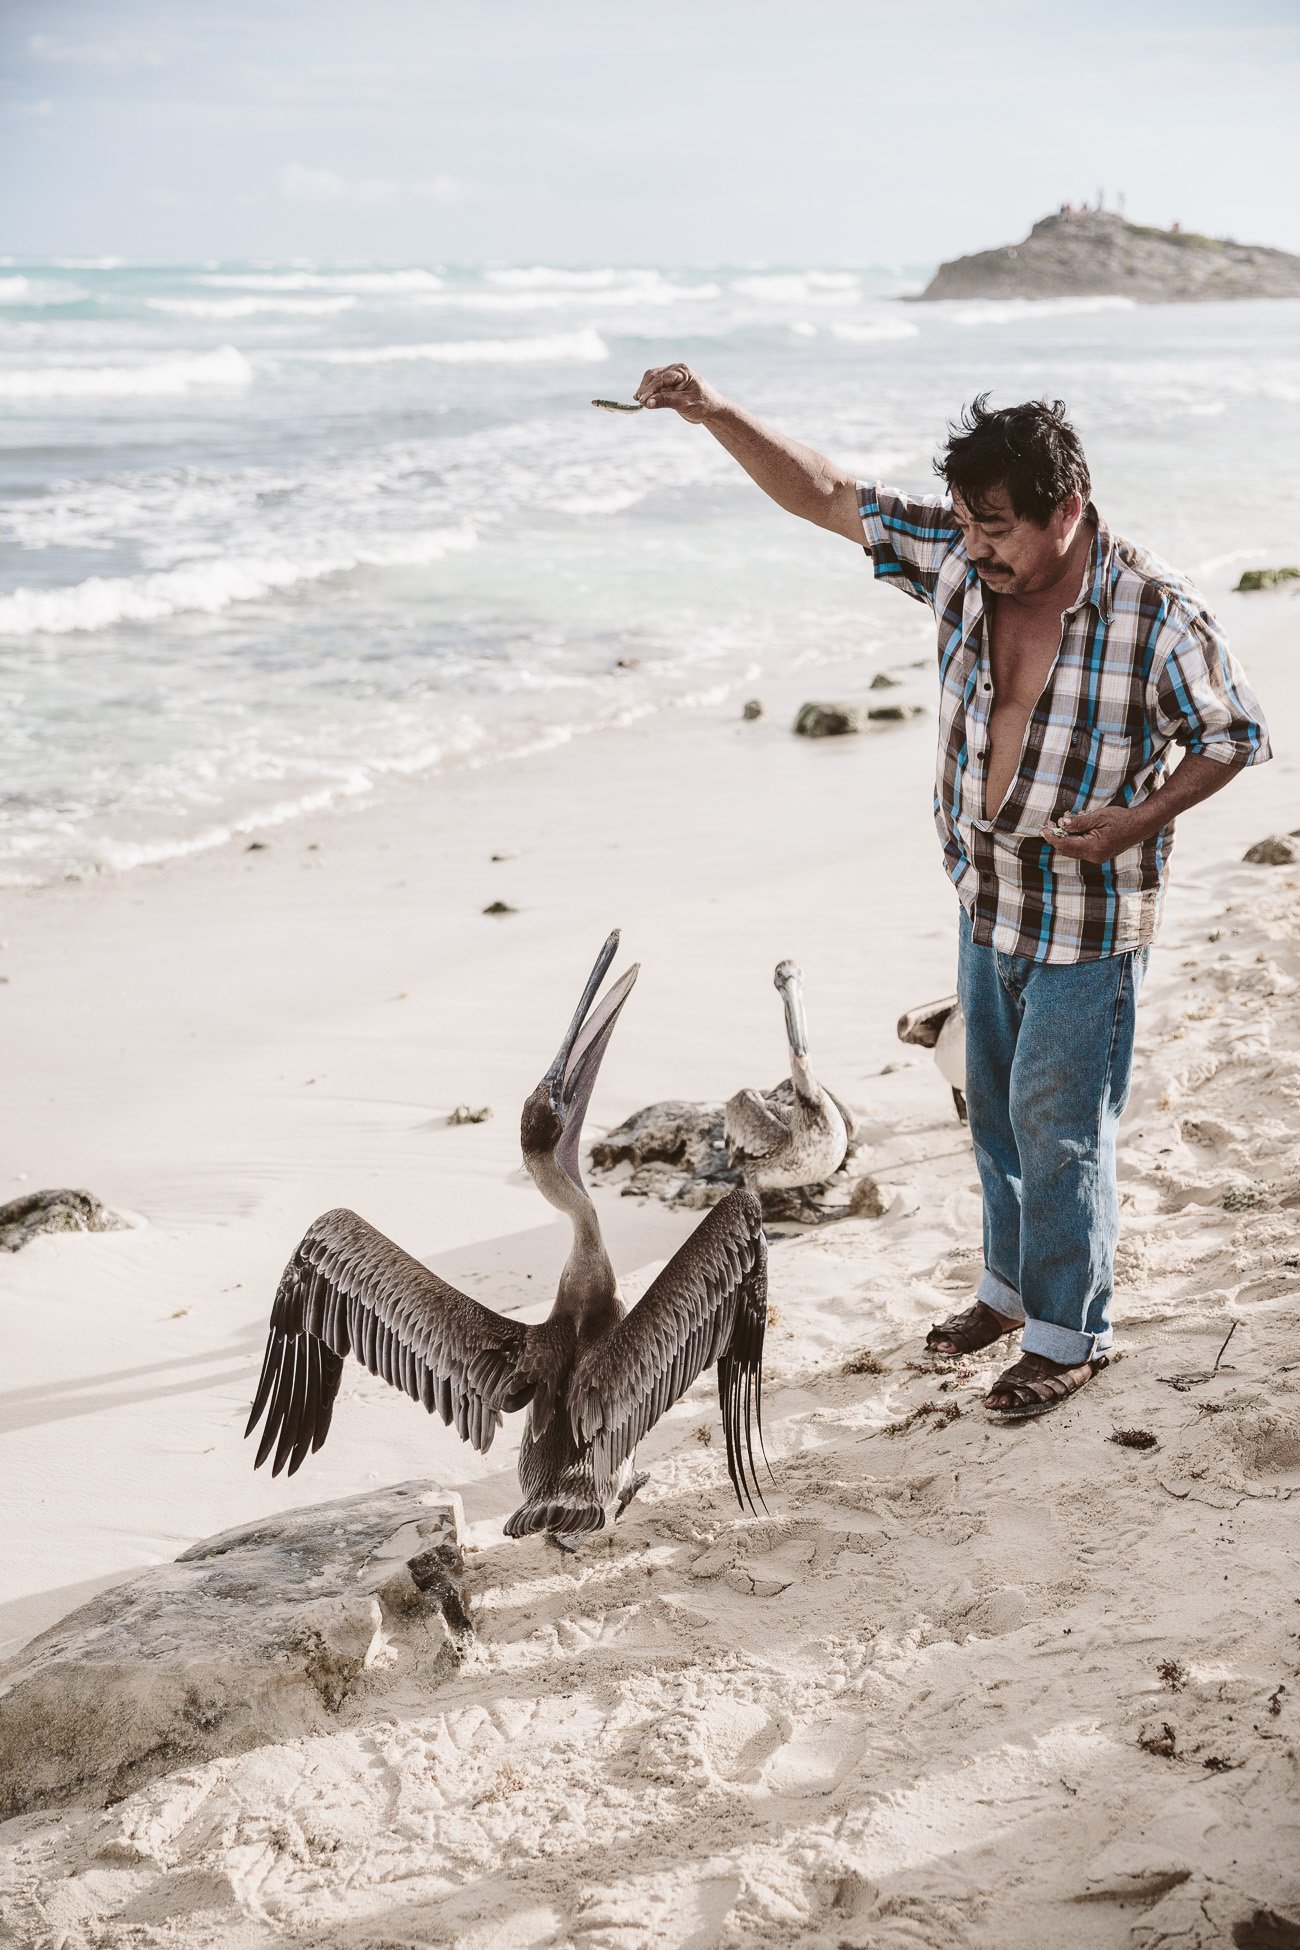 Feed pelicans in Tulum, Mexico